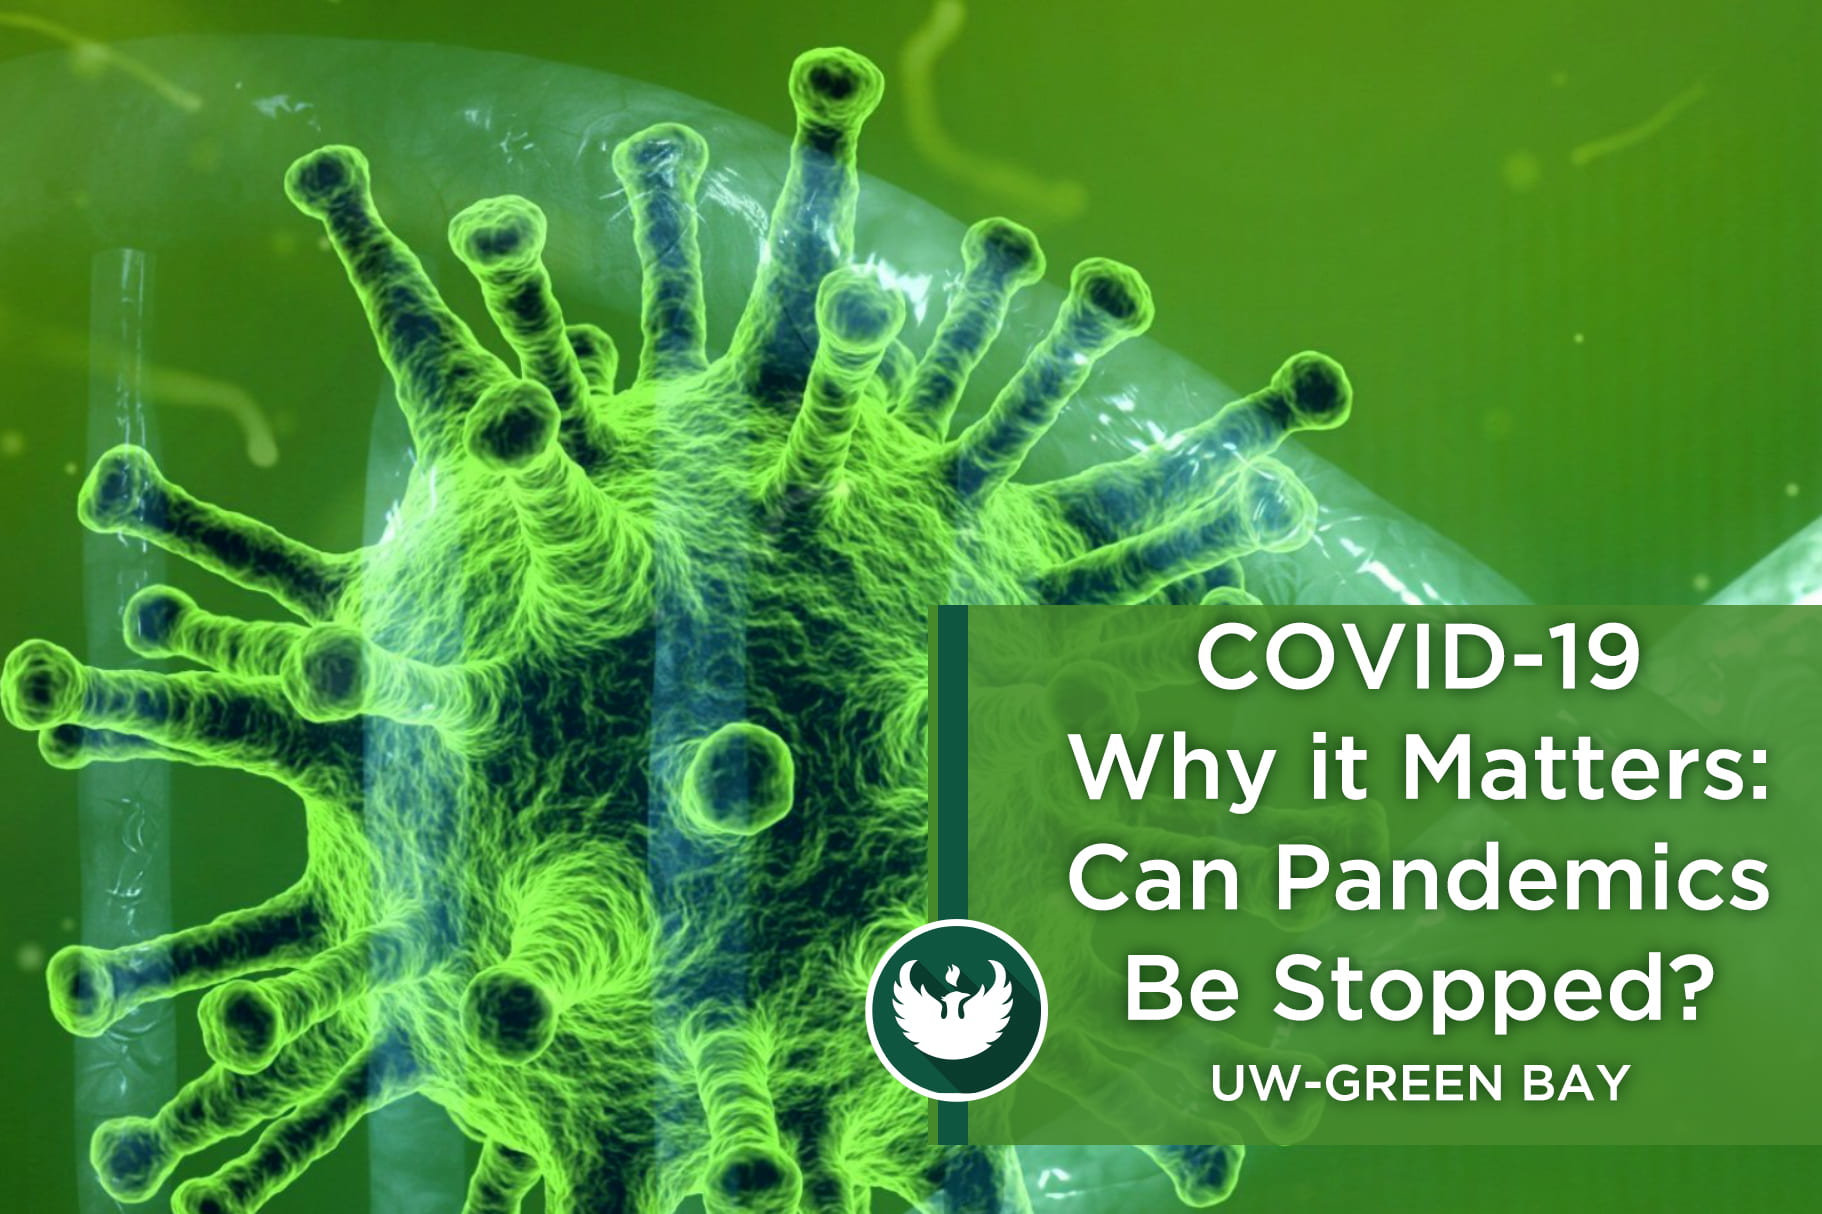 A graphic showing a close up of the covid-19 virus with a text overlay "COVID-19 Why it Matters,Can pandemics be stopped?"